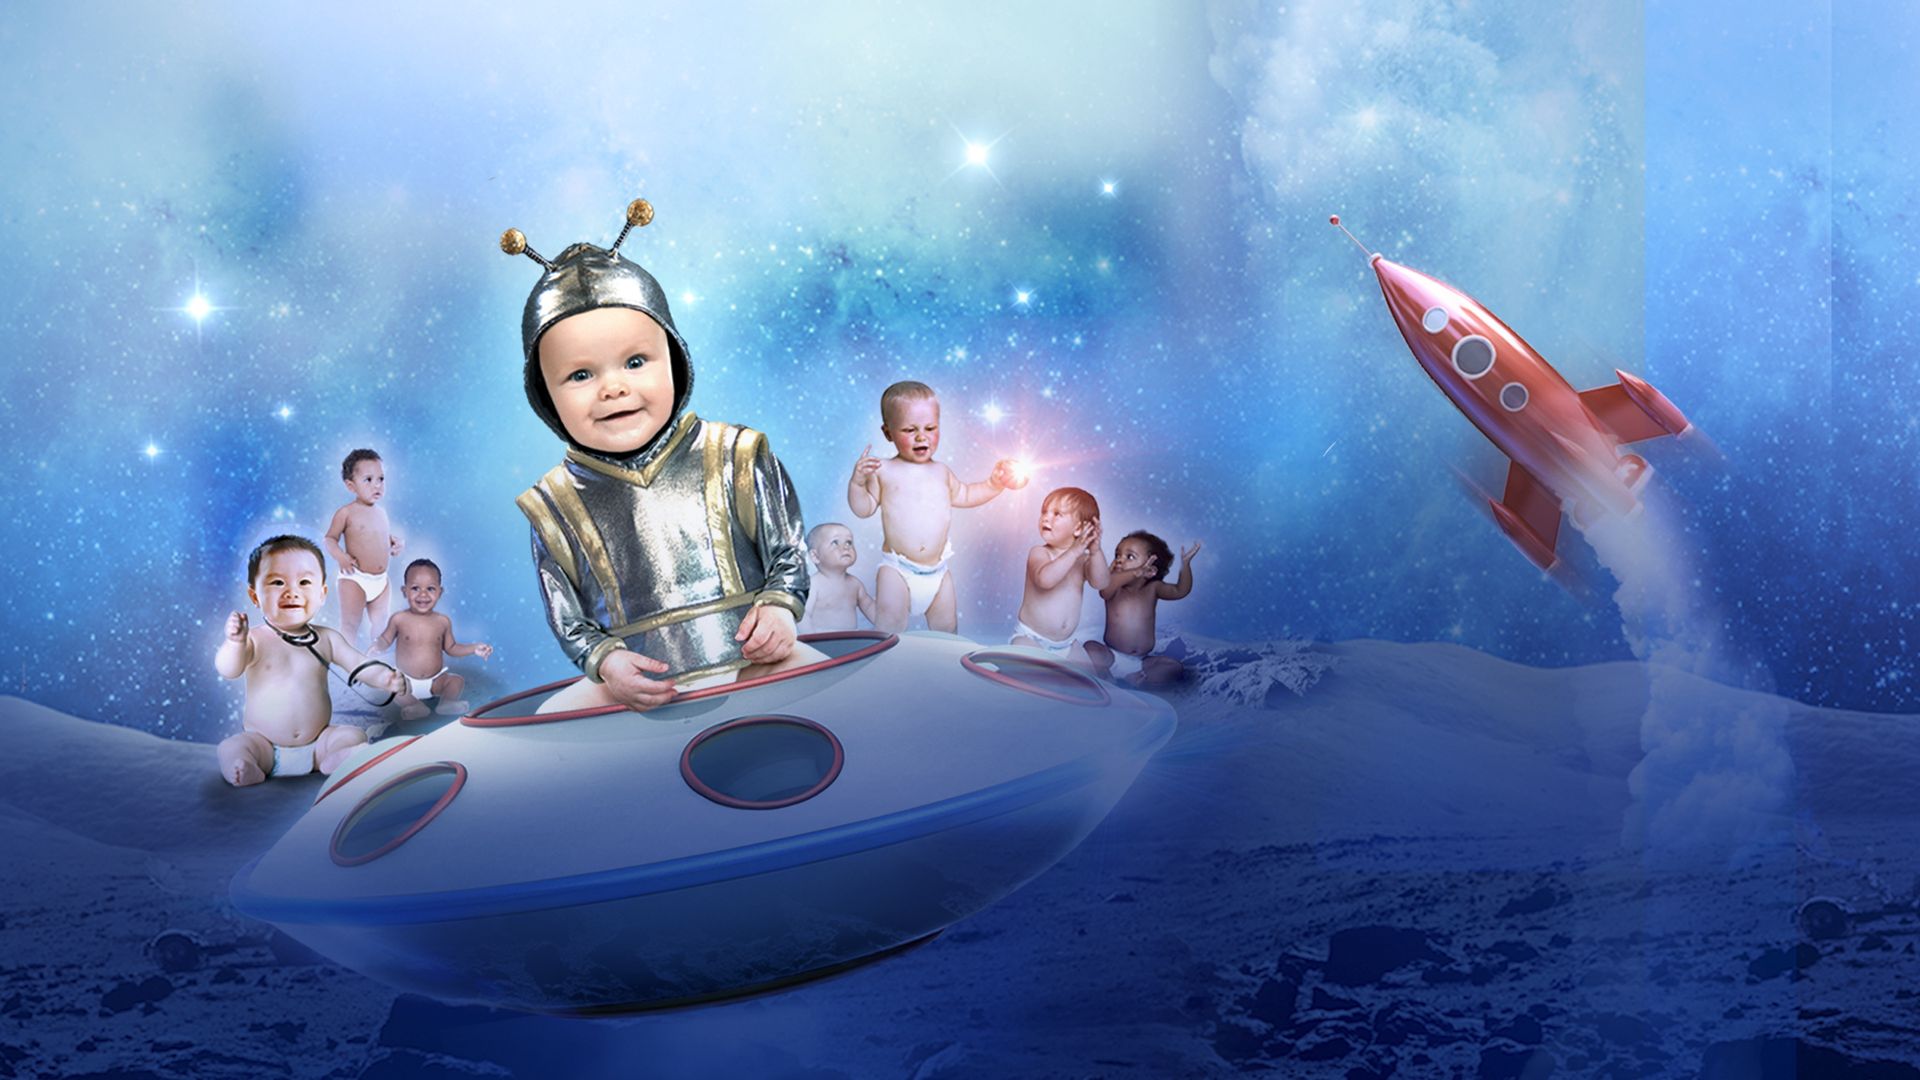 Baby Geniuses and the Space Baby Backdrop